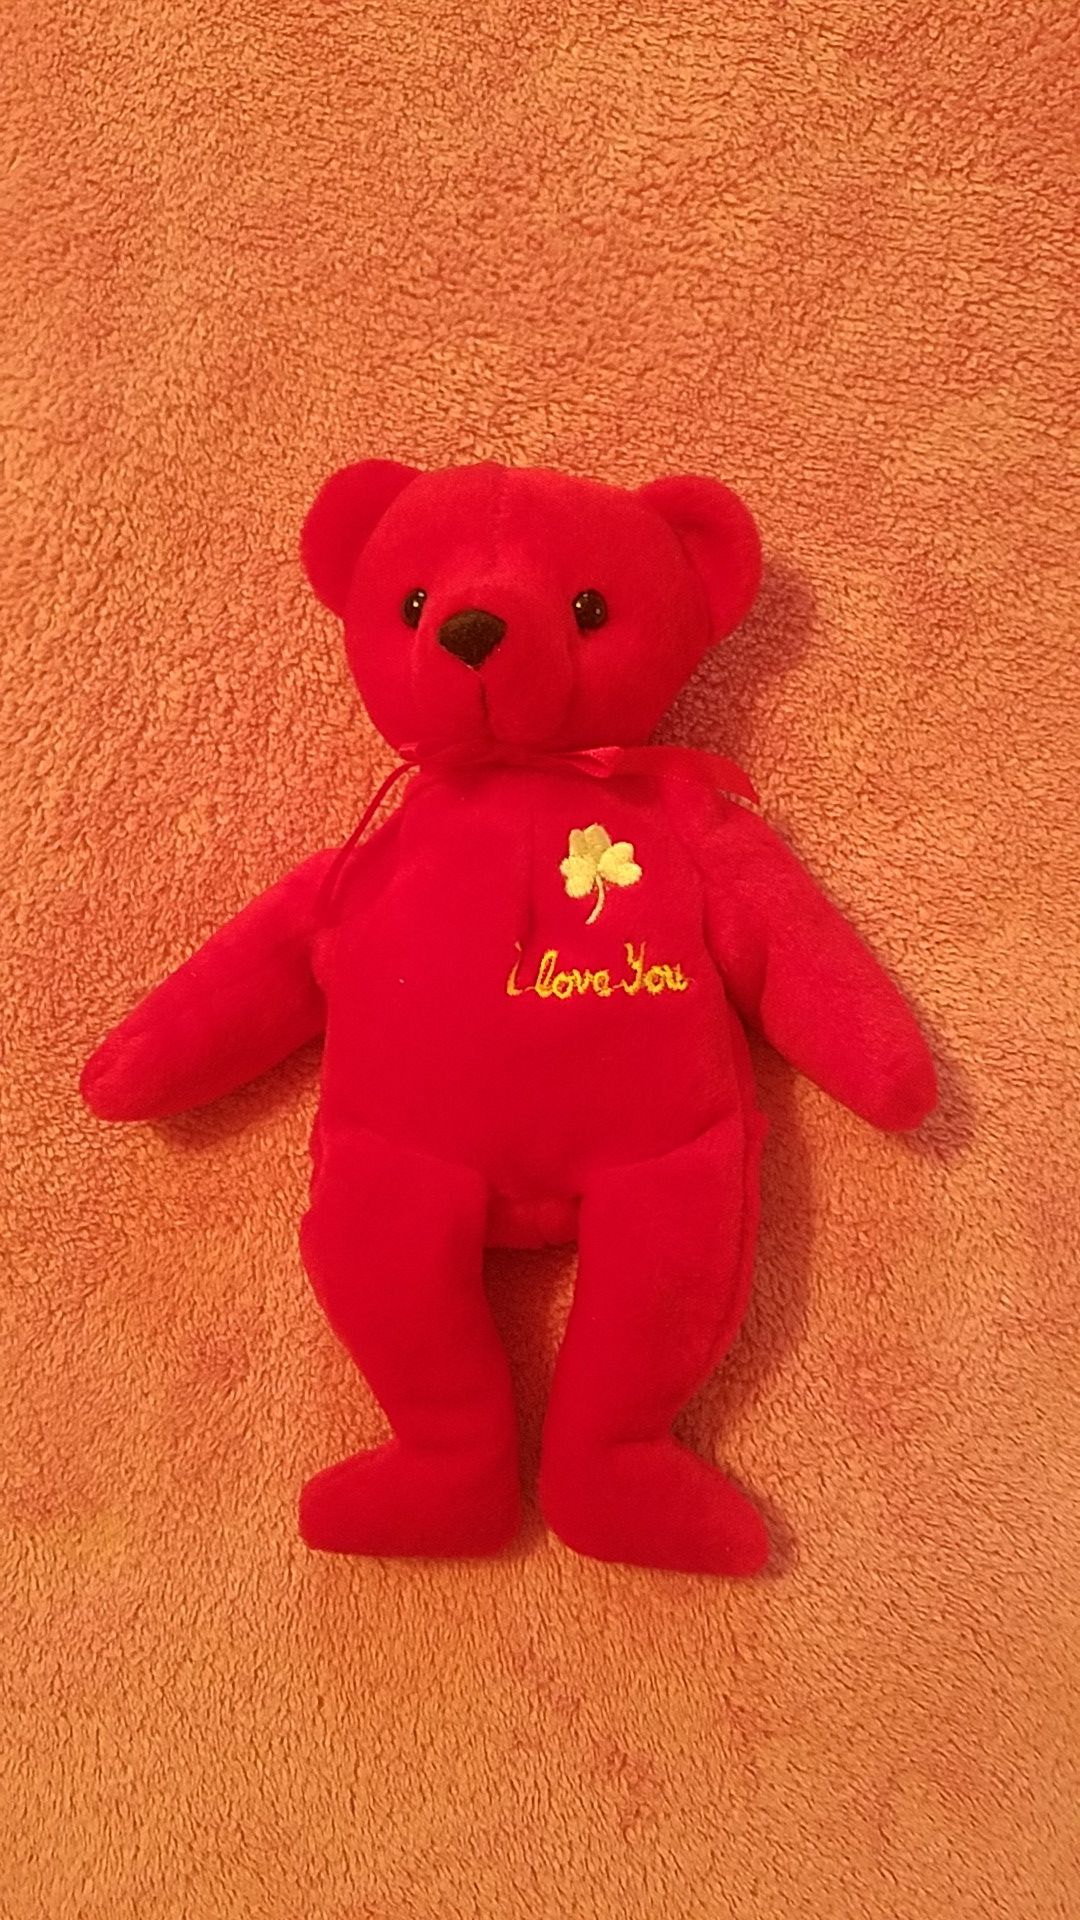 Brand new Valentine's day red "I love you" bear